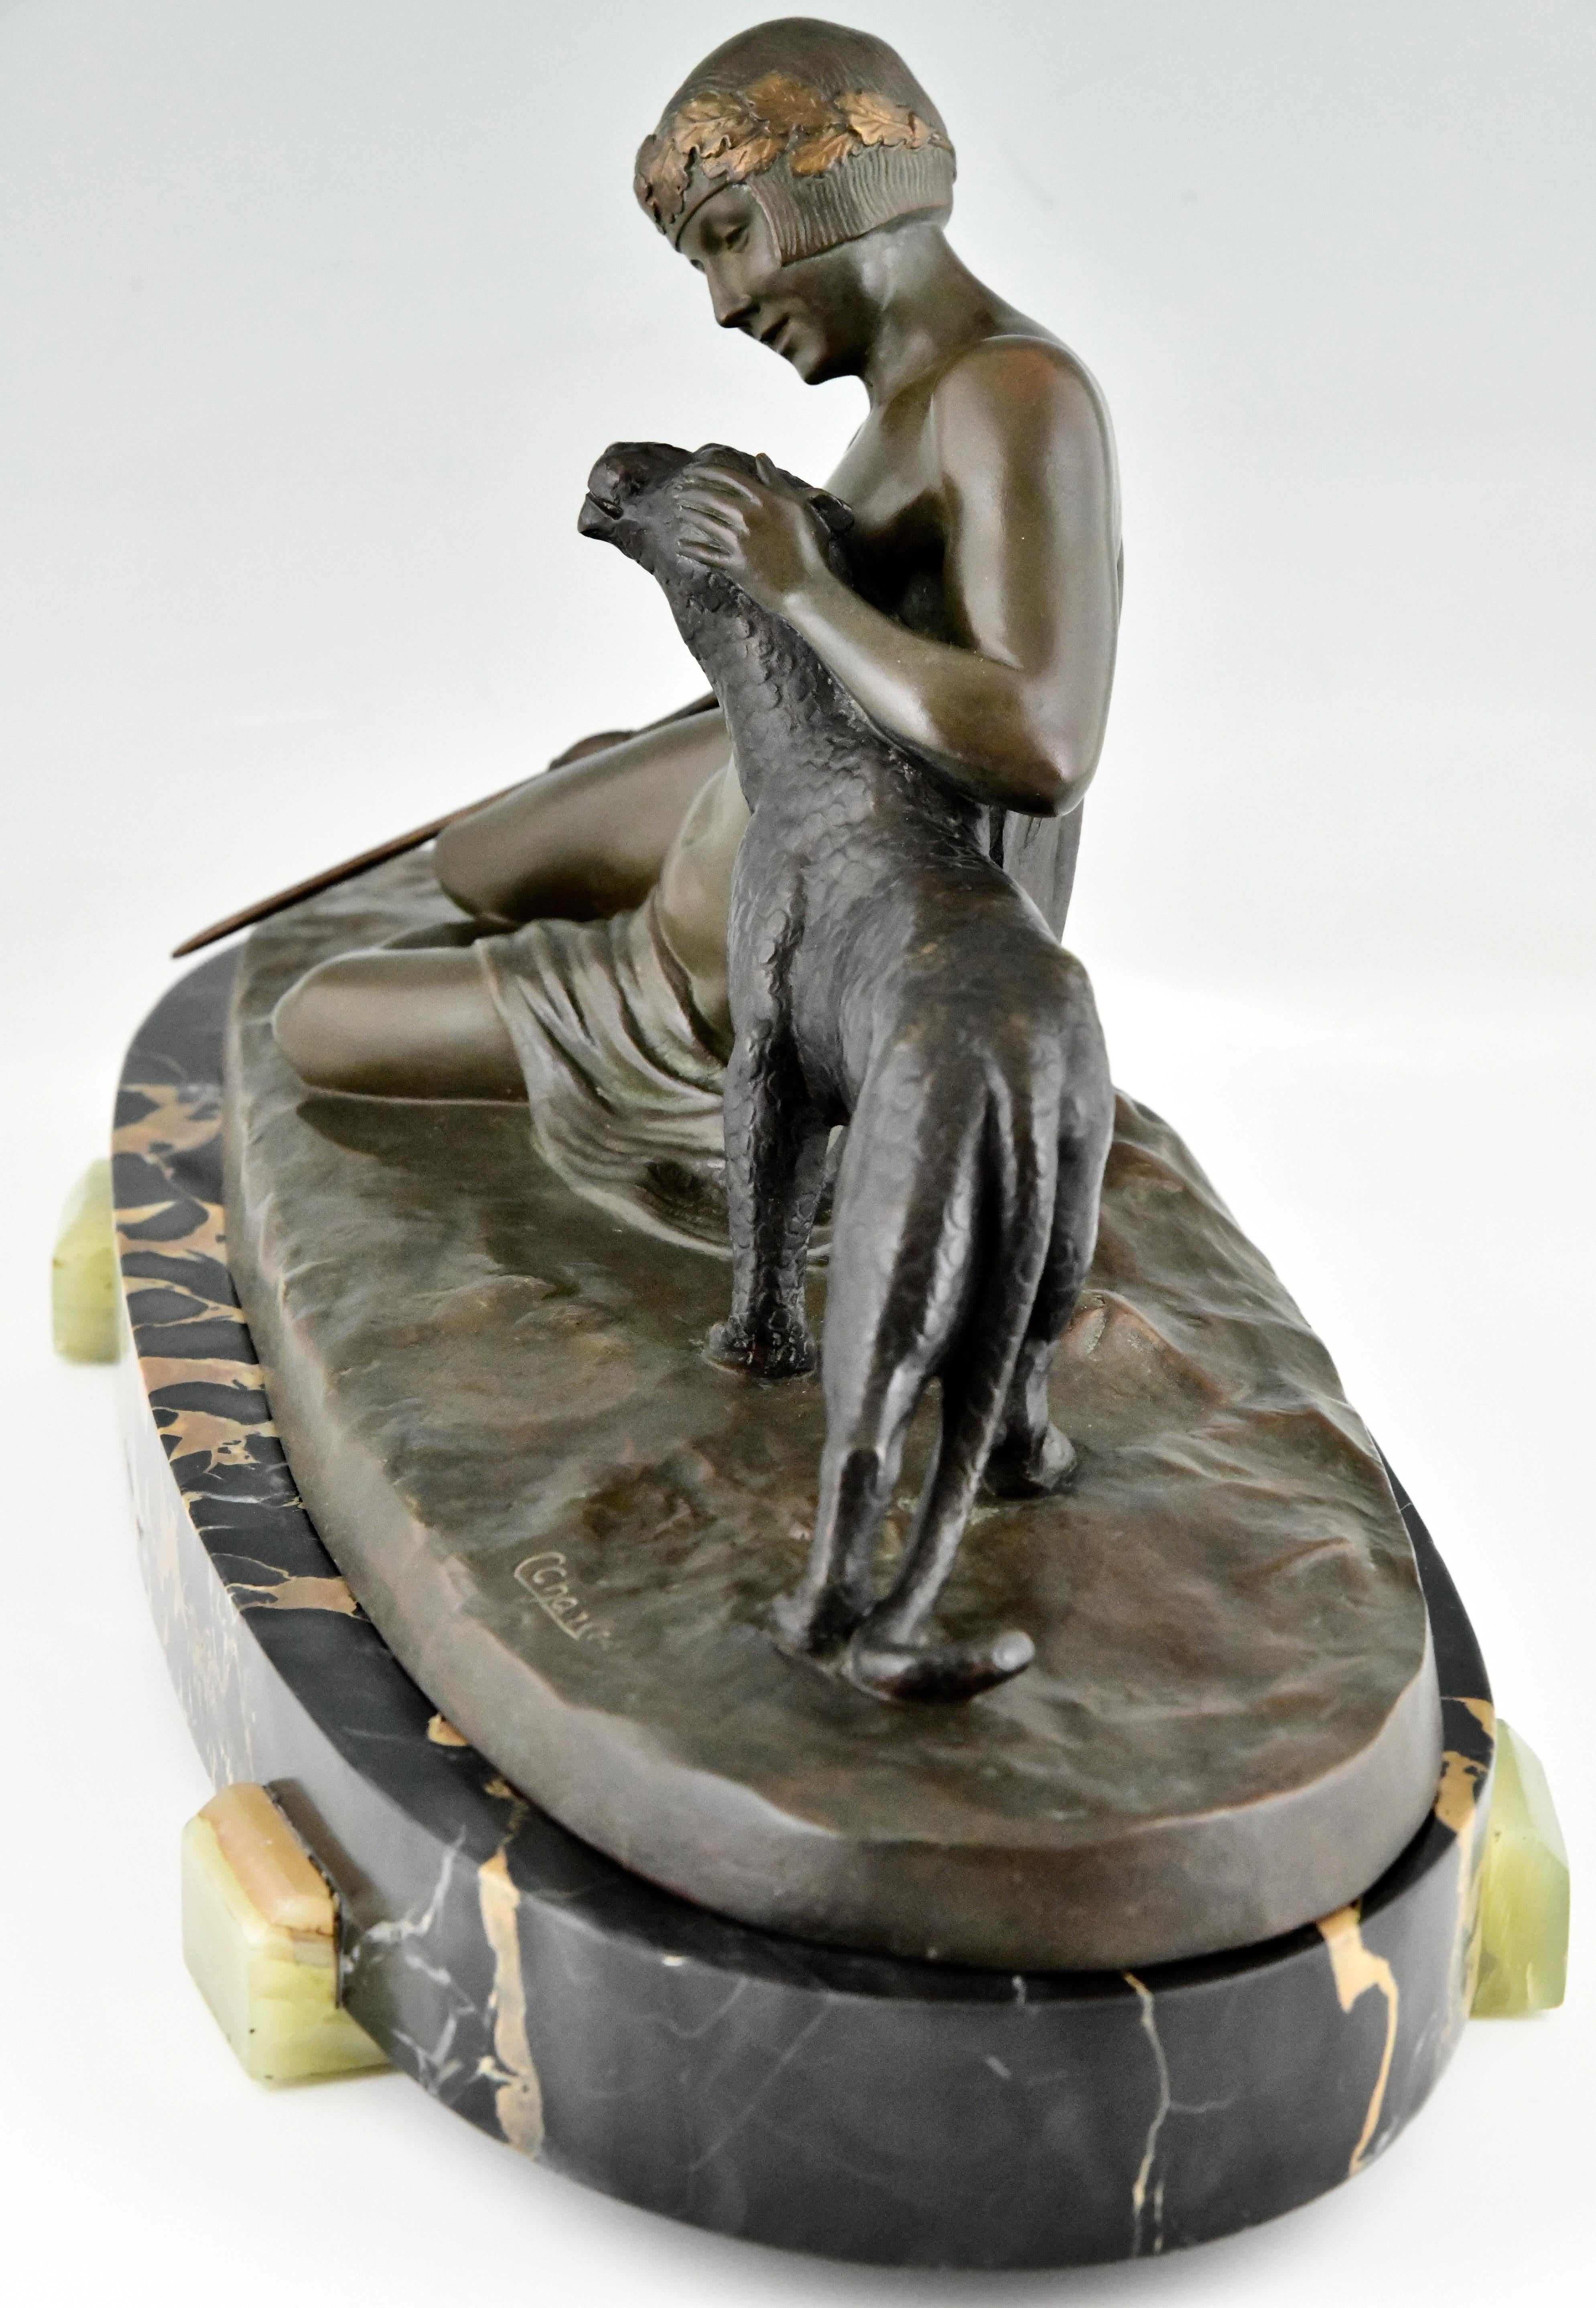 Mid-20th Century Art Deco Bronze Sculpture Lady with Panther Signed by C. Charles France 1930 For Sale